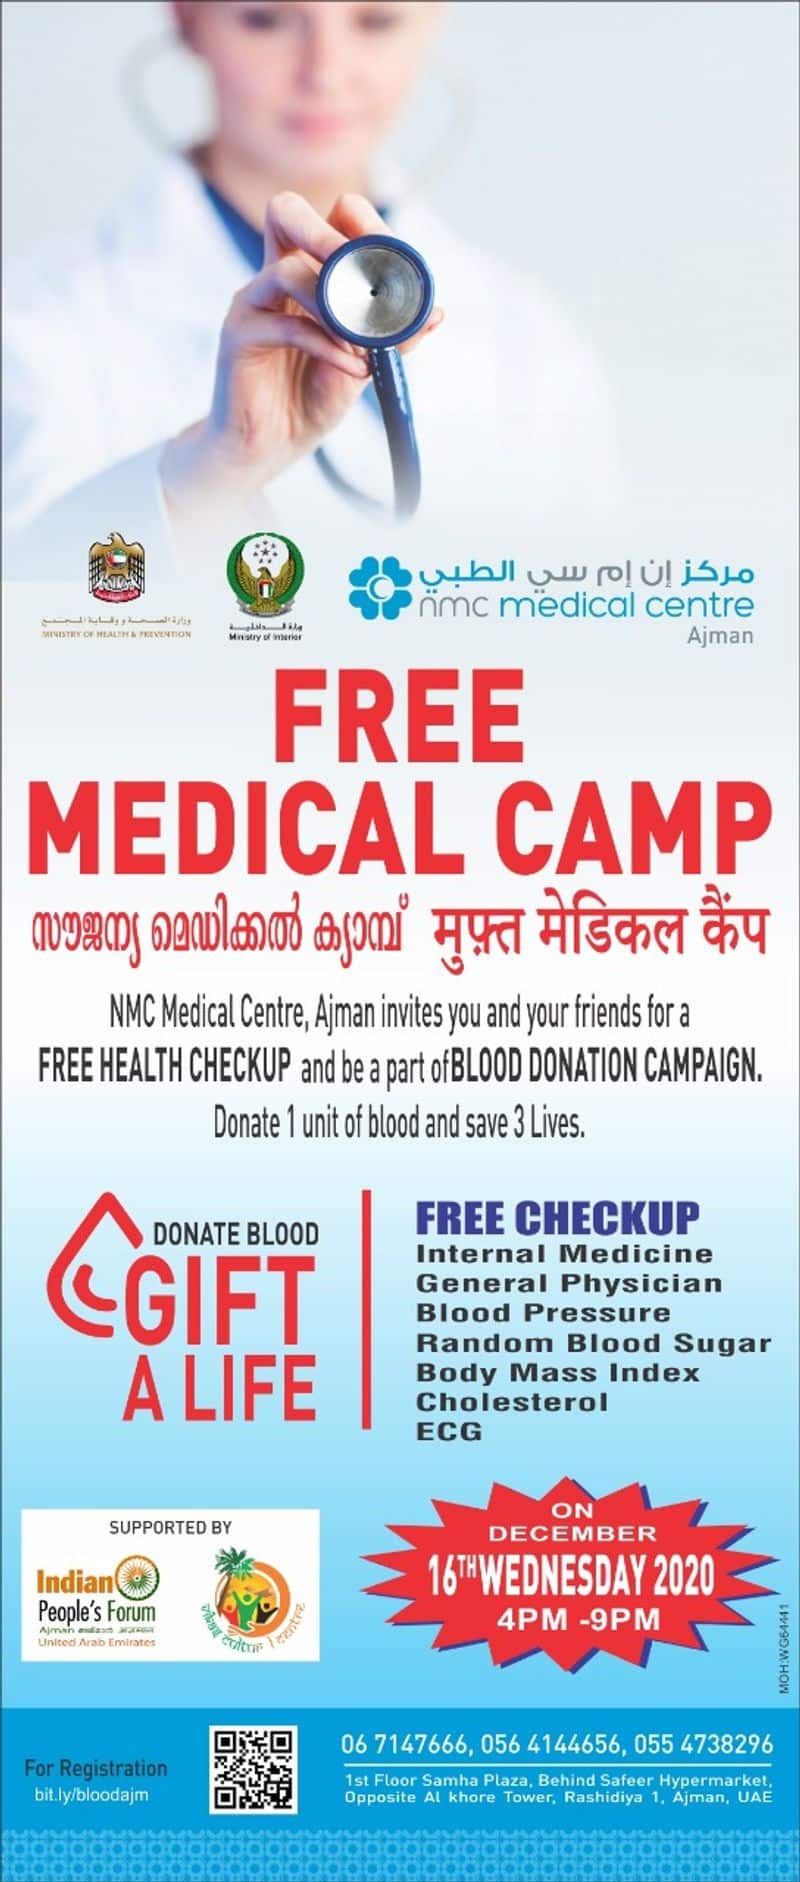 NMC medical centre orgnaises free medical check up and blood donation camp